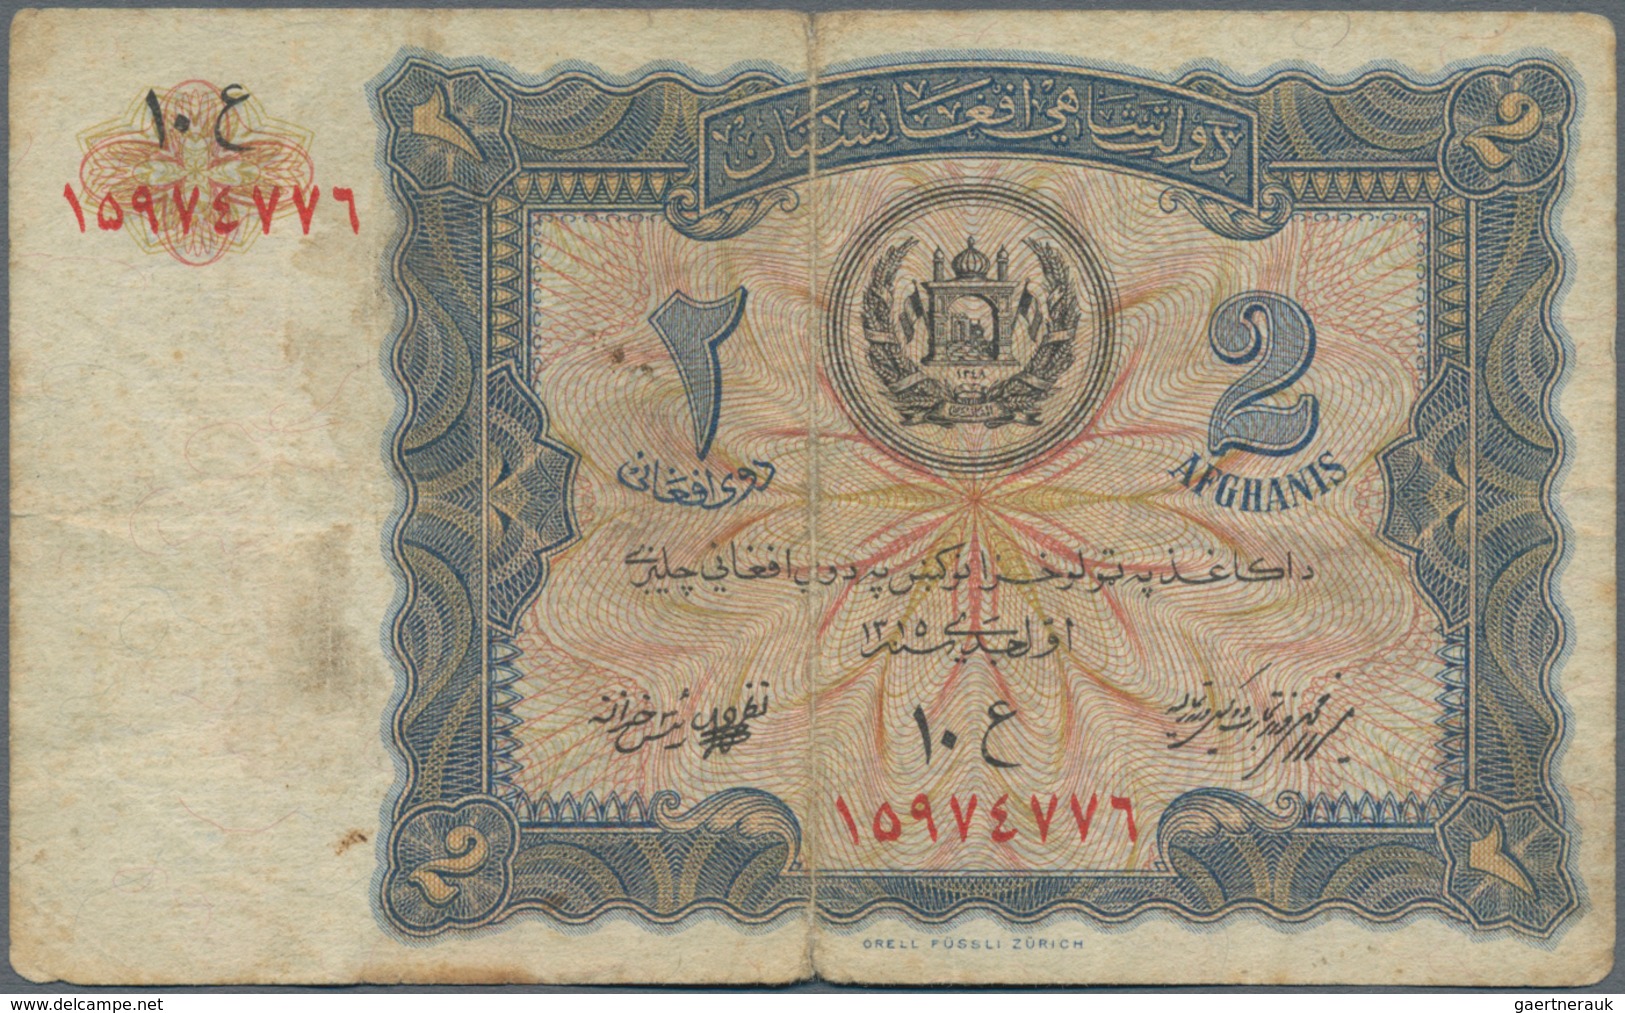 Afghanistan: Small Lot With 3 Banknotes 1 Afghani SH 1298 (1919) P.1 (F), 50 Afghanis SH 1307 (1928) - Afghanistan